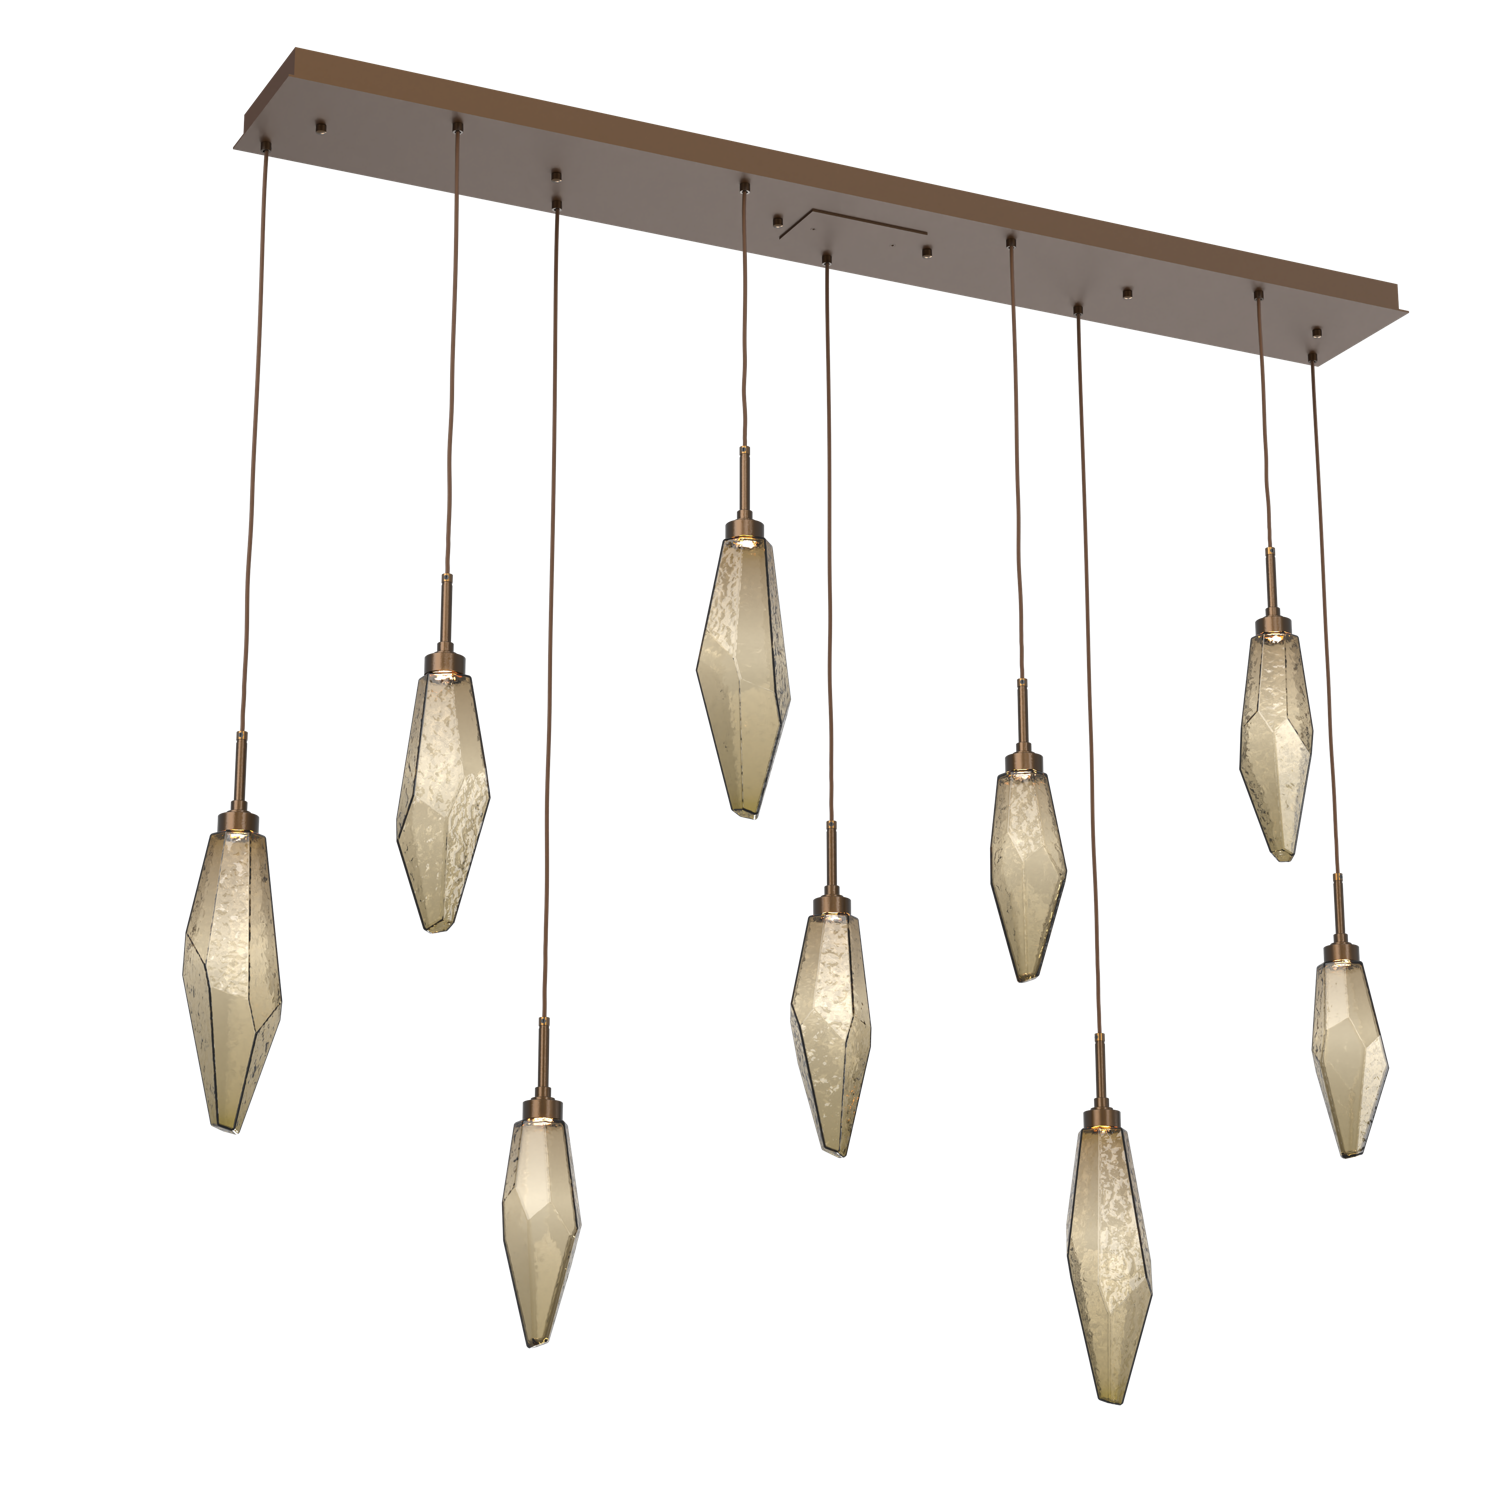 PLB0050-09-FB-CB-Hammerton-Studio-Rock-Crystal-9-light-linear-pendant-chandelier-with-flat-bronze-finish-and-chilled-bronze-blown-glass-shades-and-LED-lamping